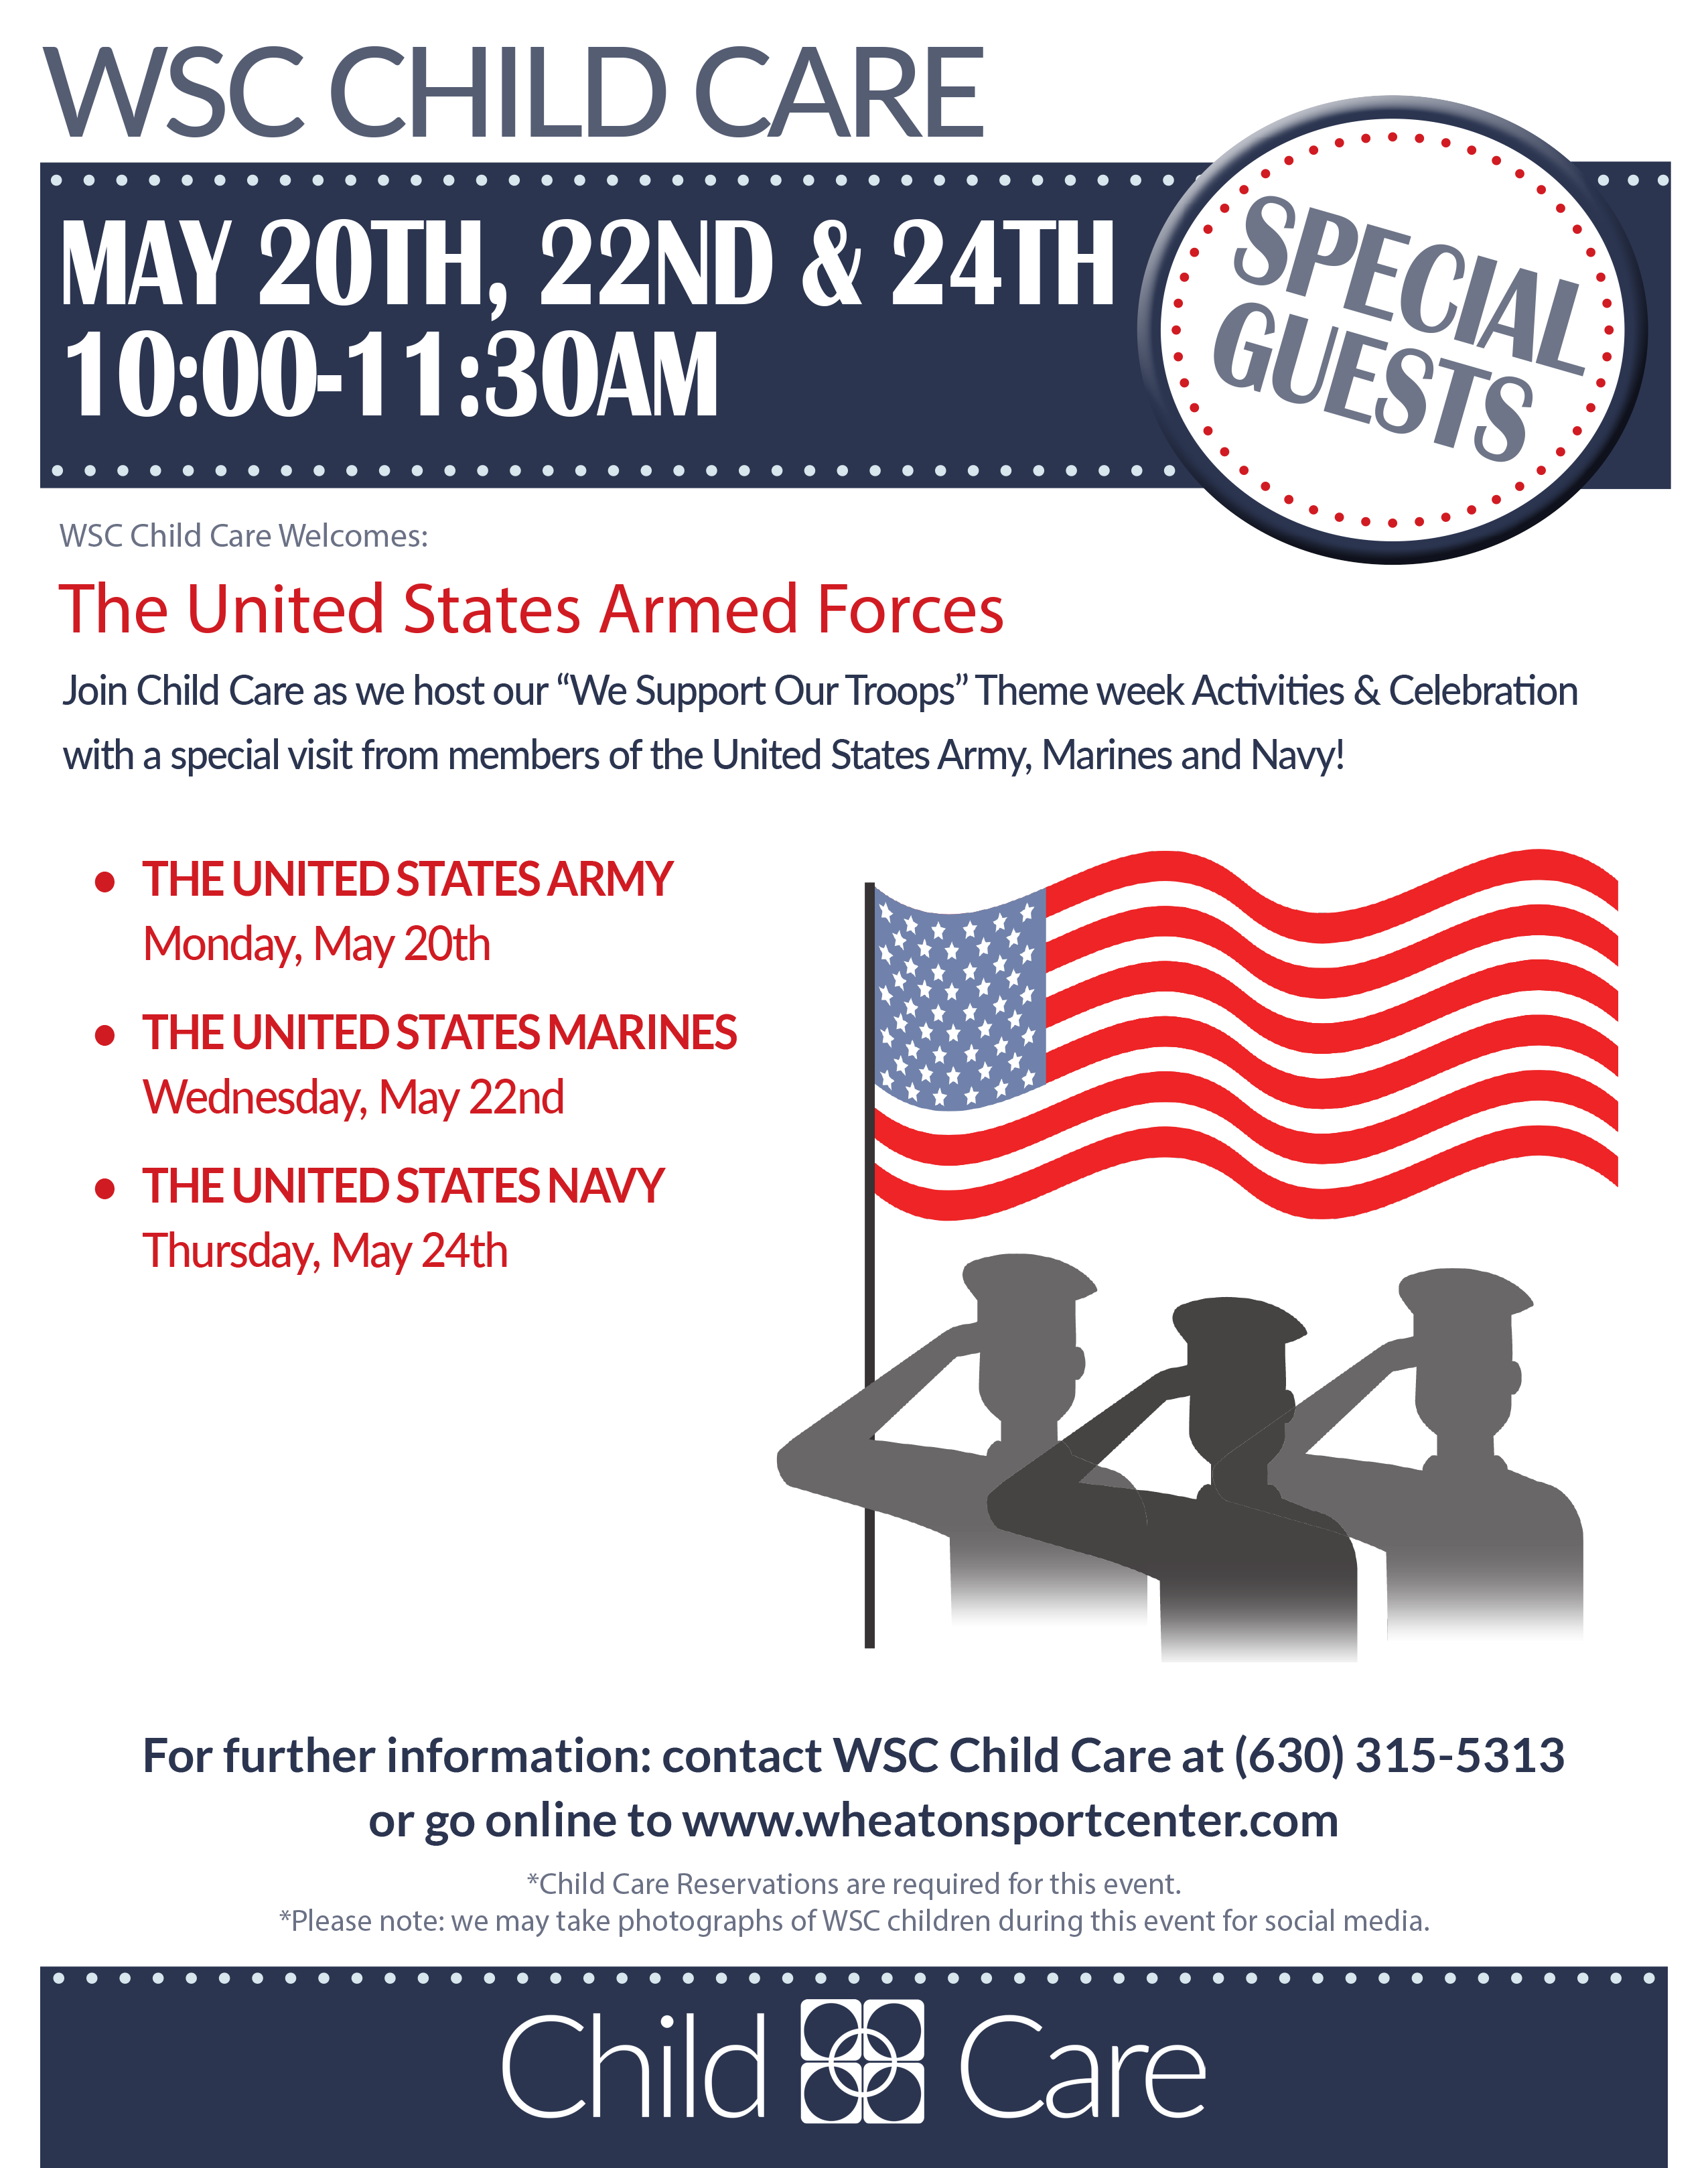 Wheaton Sport Center CC Guests (Armed Forces) - May 20, 22 and 24th 10-11:30am